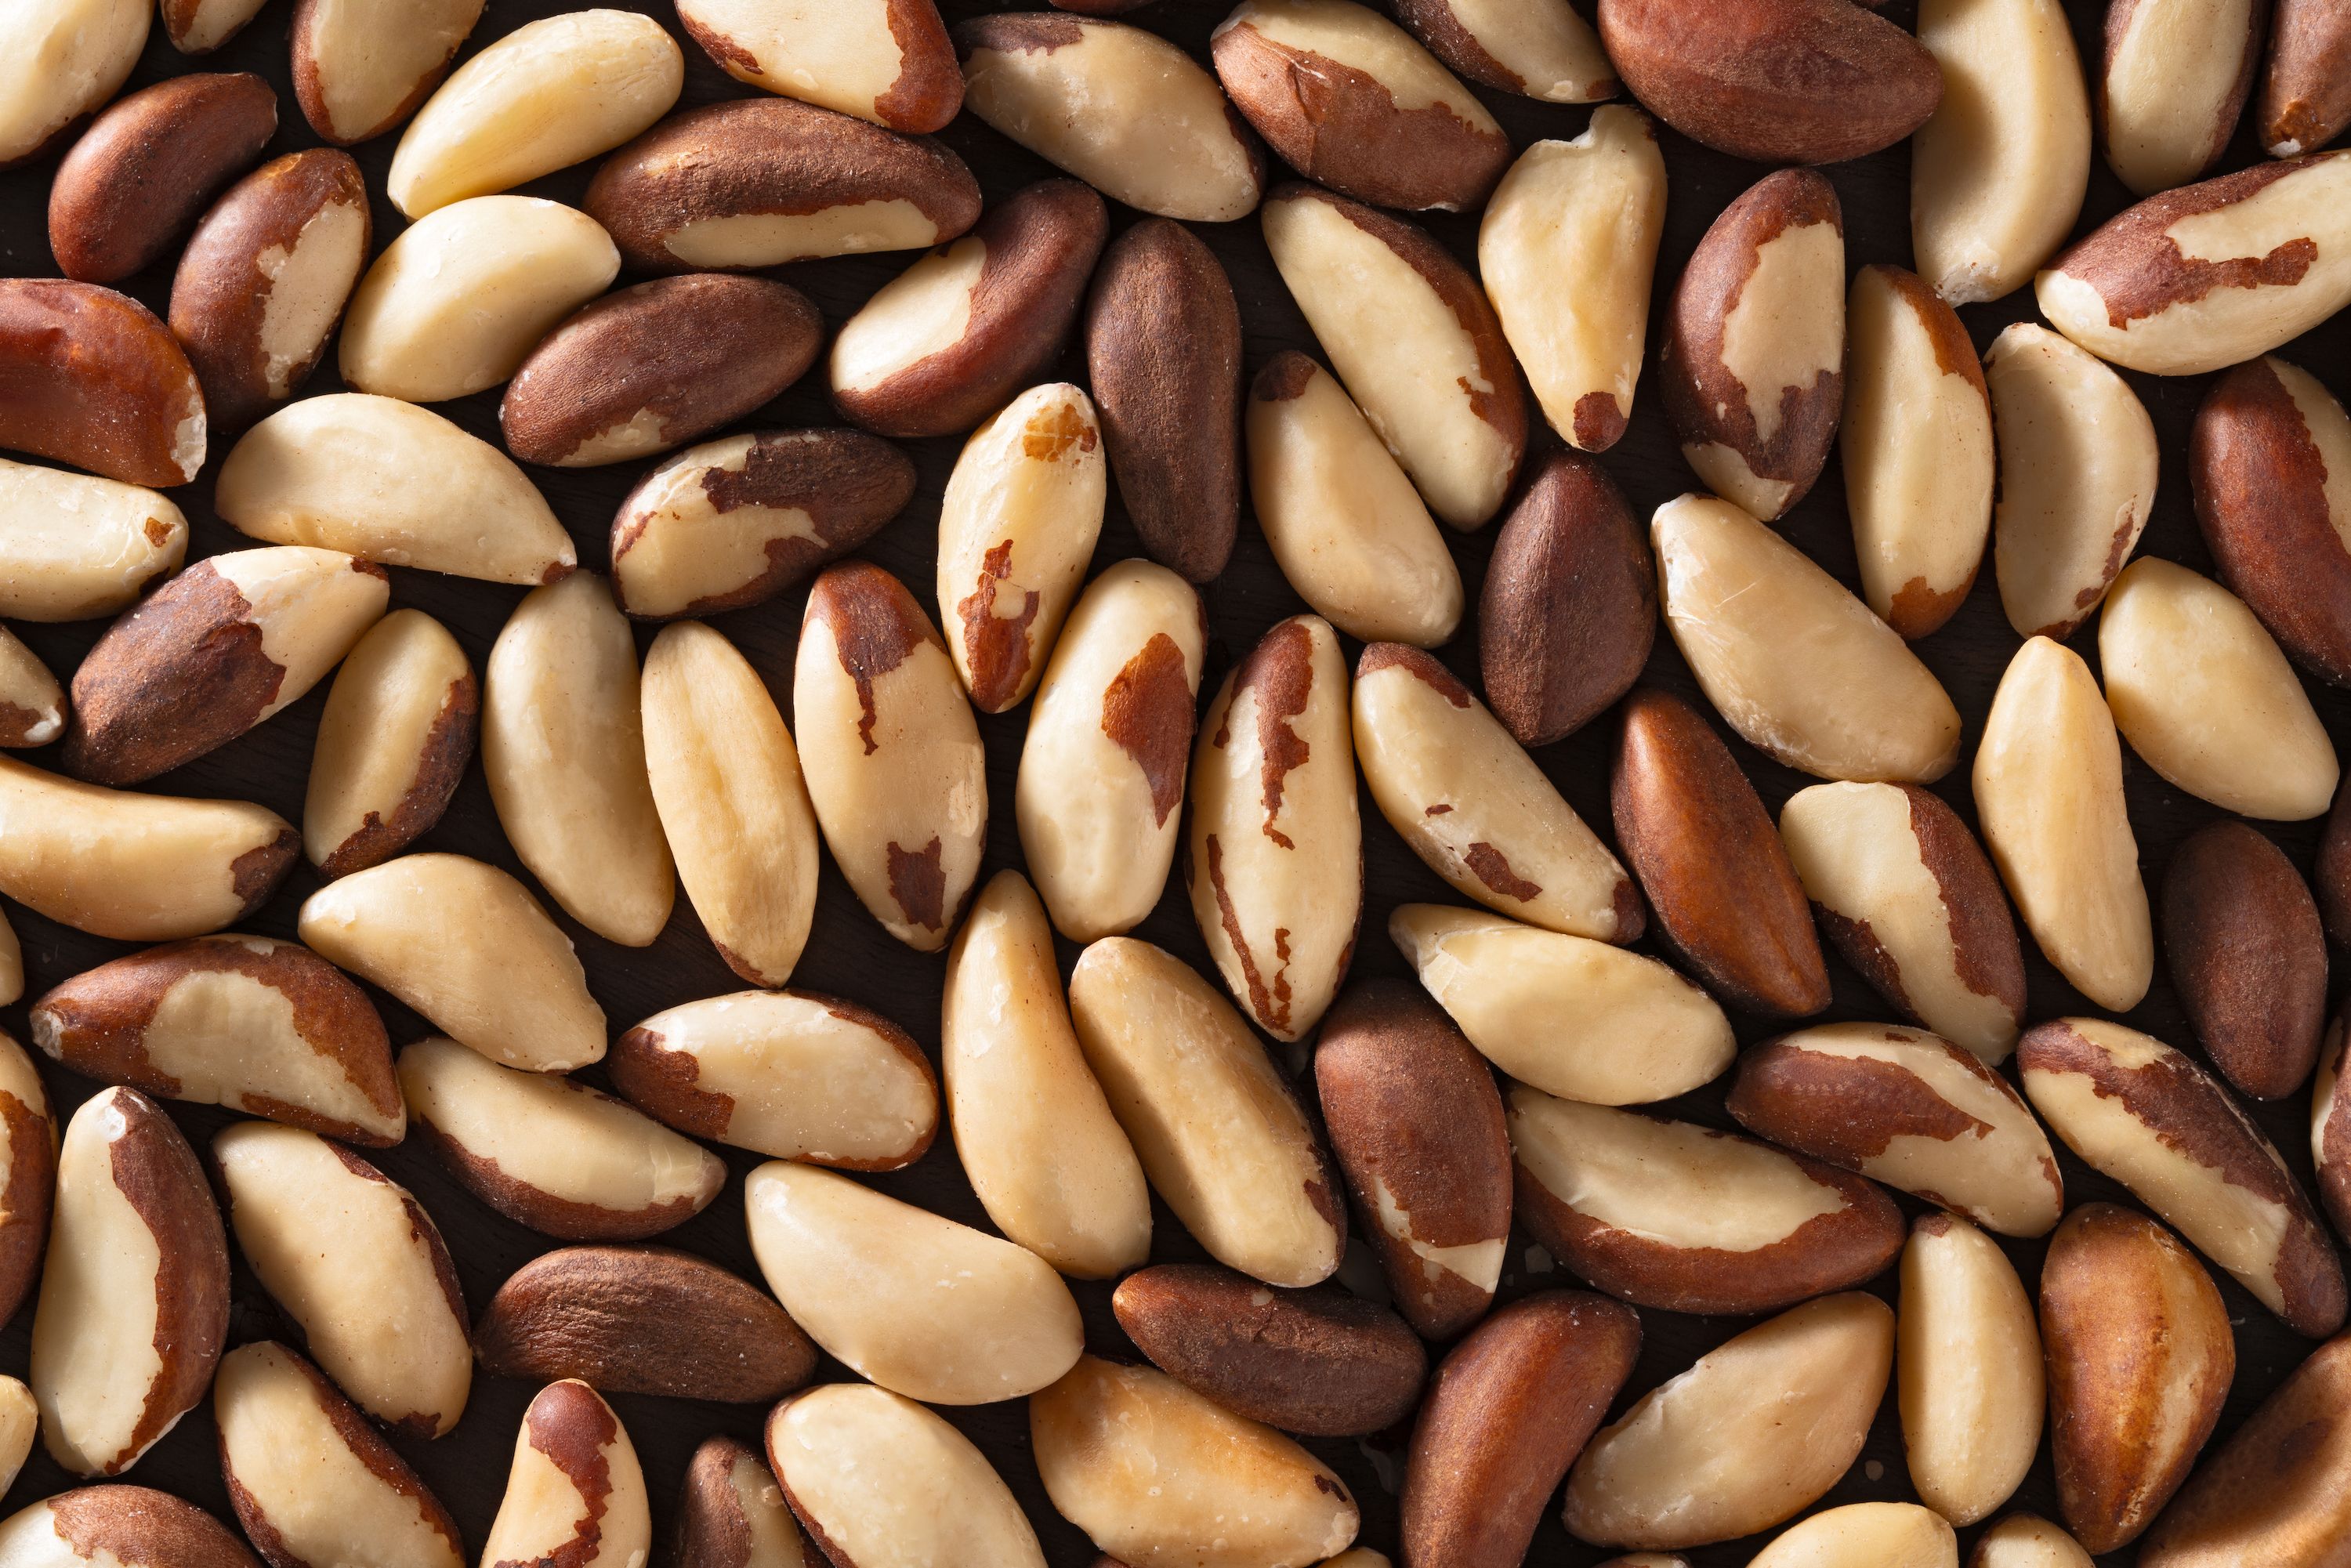 The Top 9 Nuts to Eat for Better Health